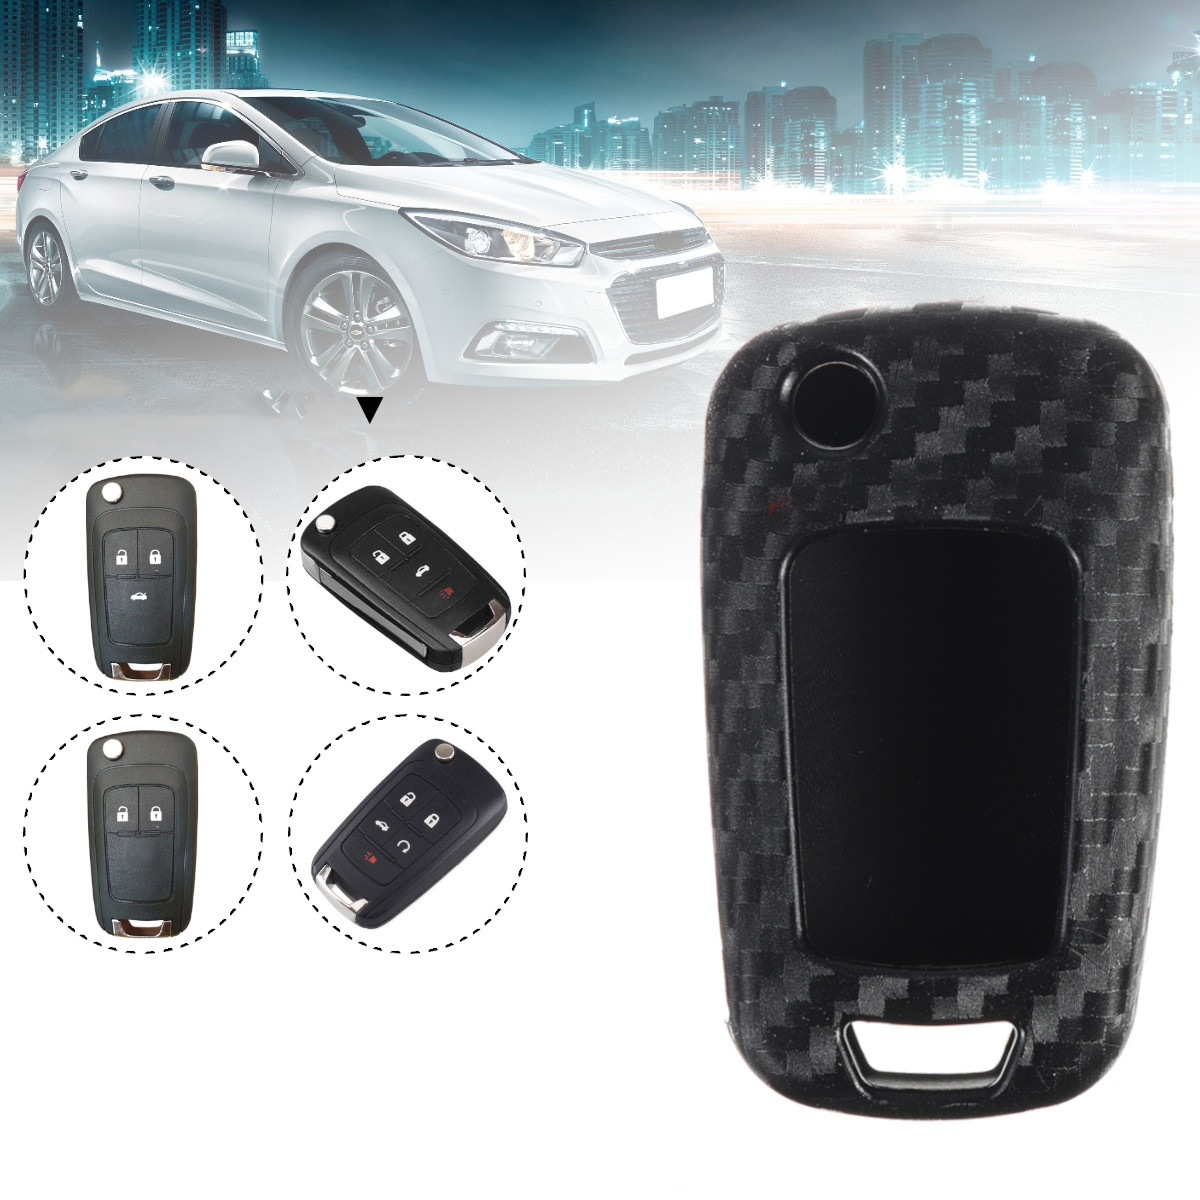 

Car-Styling Auto Fold Carbon Fiber Grain Shell Protection Cover Case Chevrolet Cruze Aveo For Opel Astra